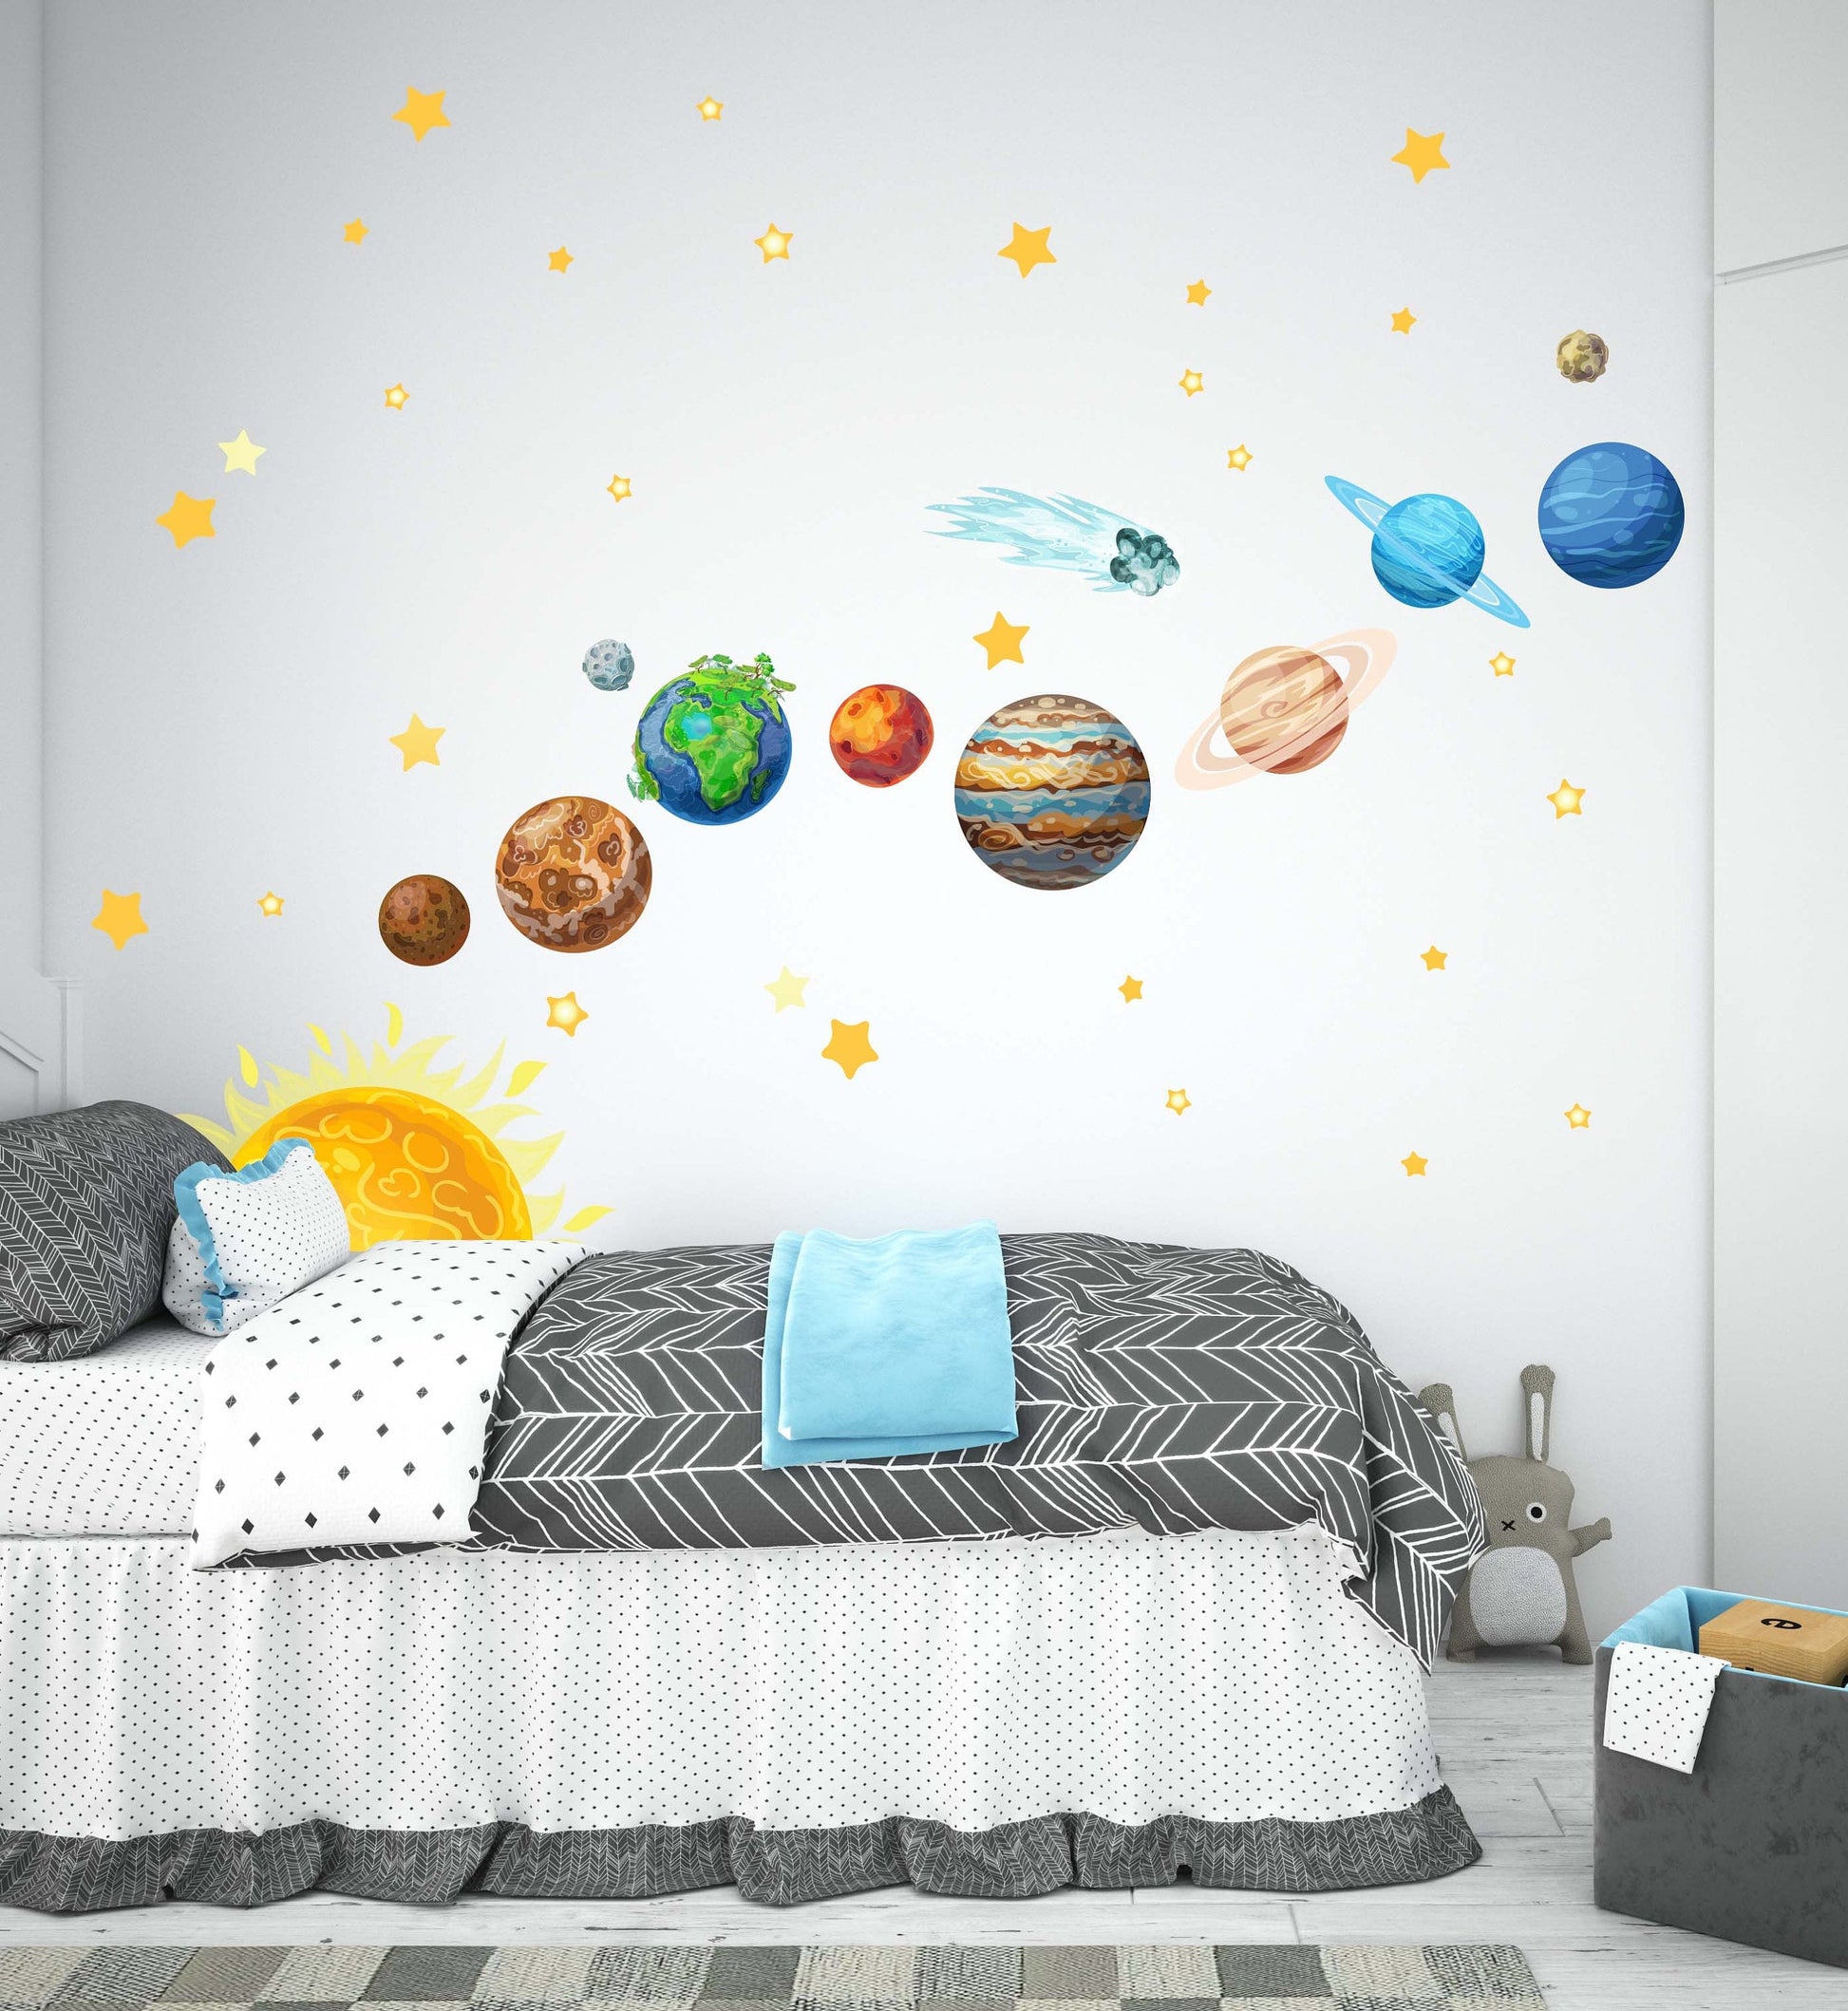 Sun Planets Wall Decals Space Stickers Solar System Kids Room Decor Classroom Stars Comet, LF479